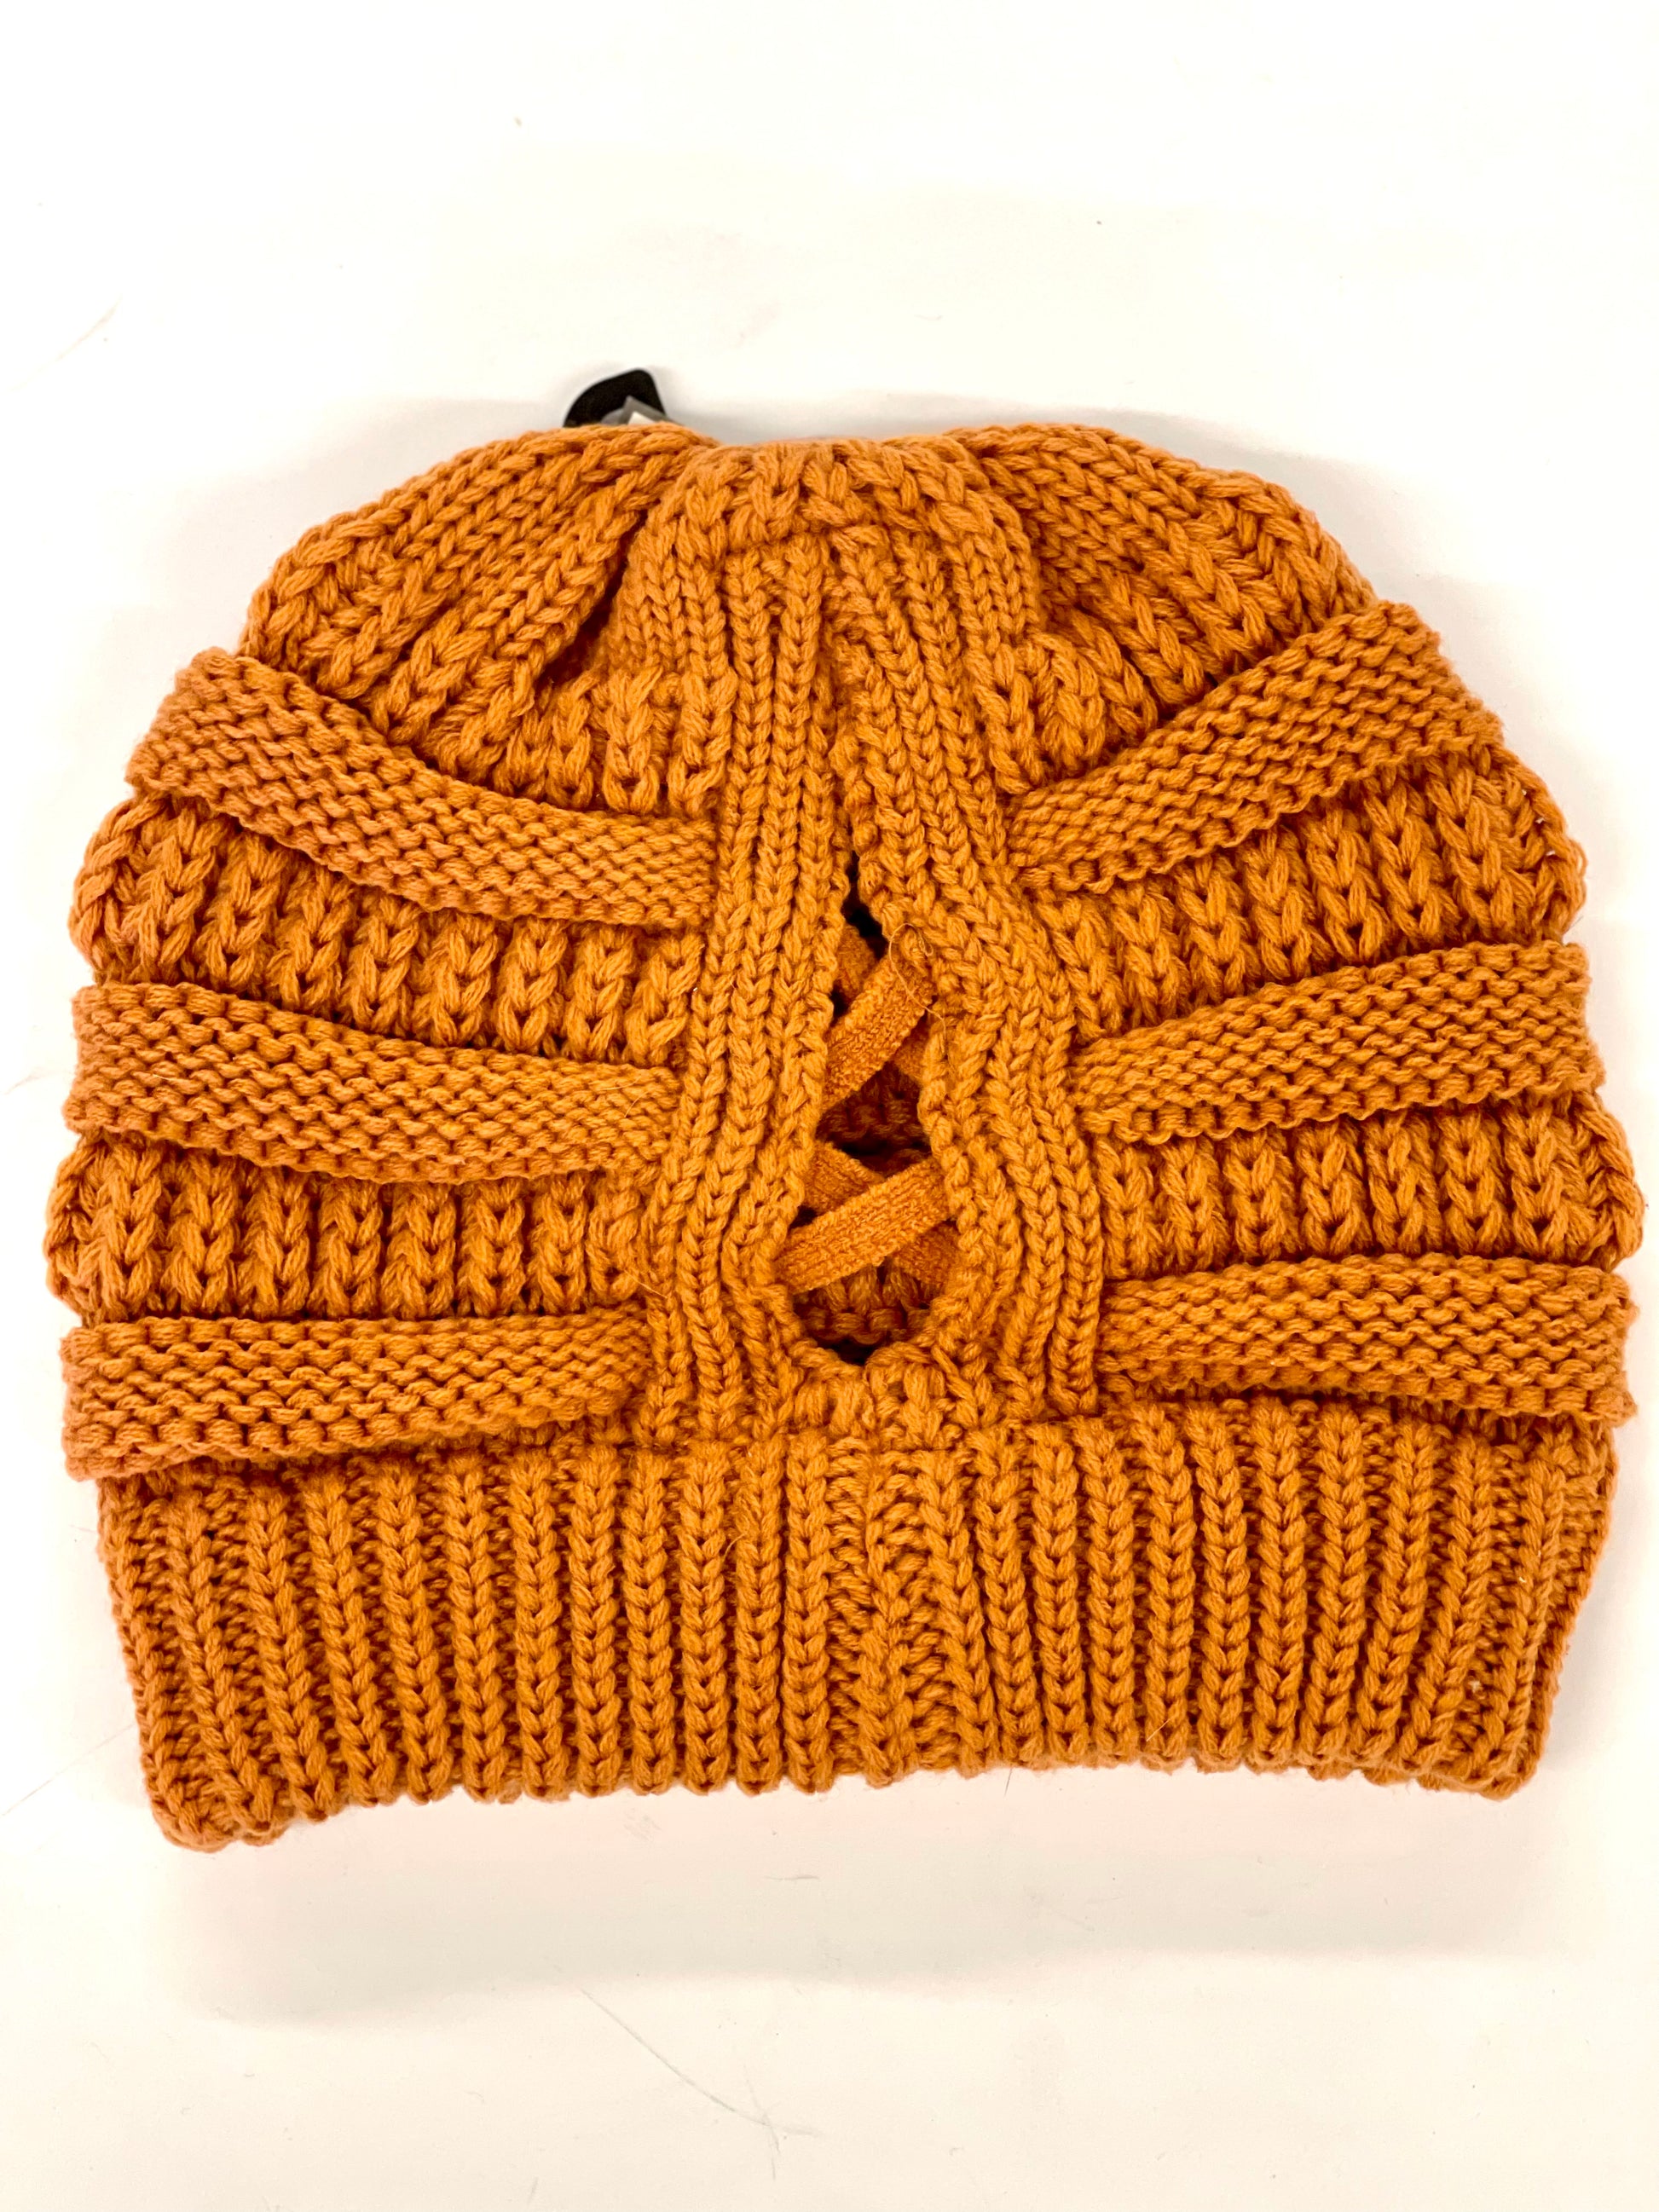 Burnt Orange Beanie (x-cross pony back) with brown patch antique hardware - Patches Of Upcycling